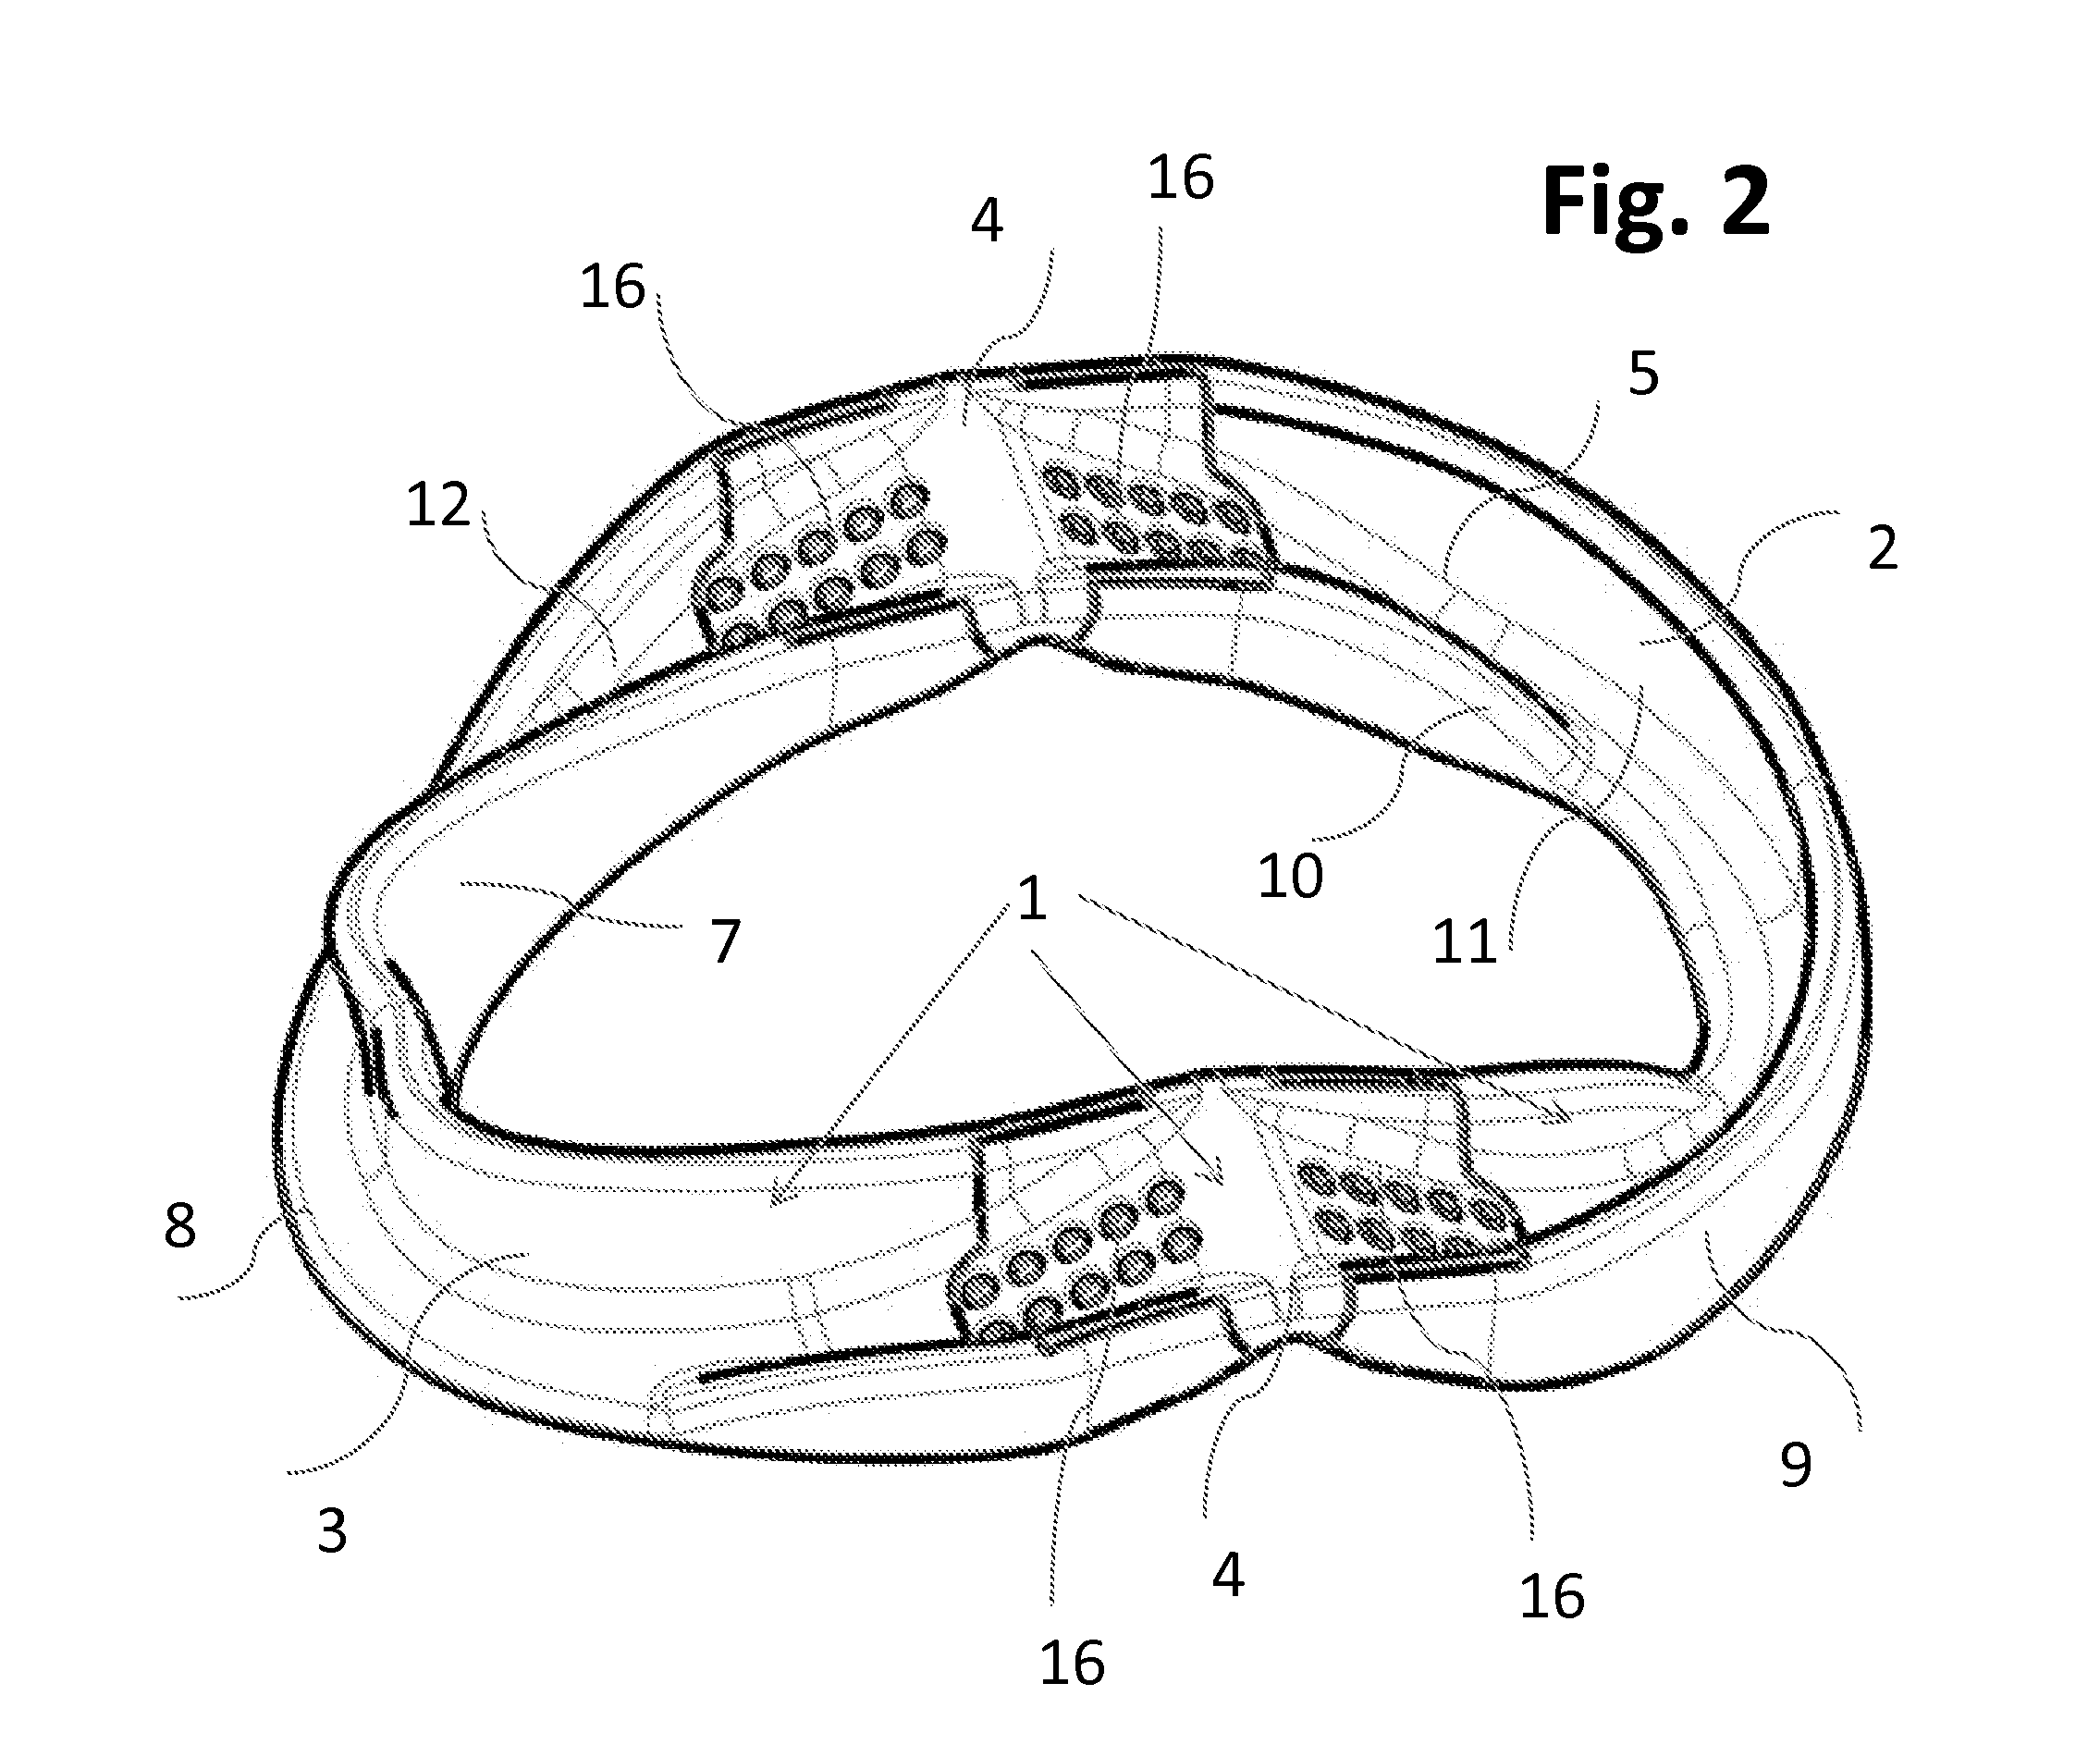 Incremental and/or successive adjustable mandibular advancement device for preventing and treatment of snoring and obstructive sleep apnea